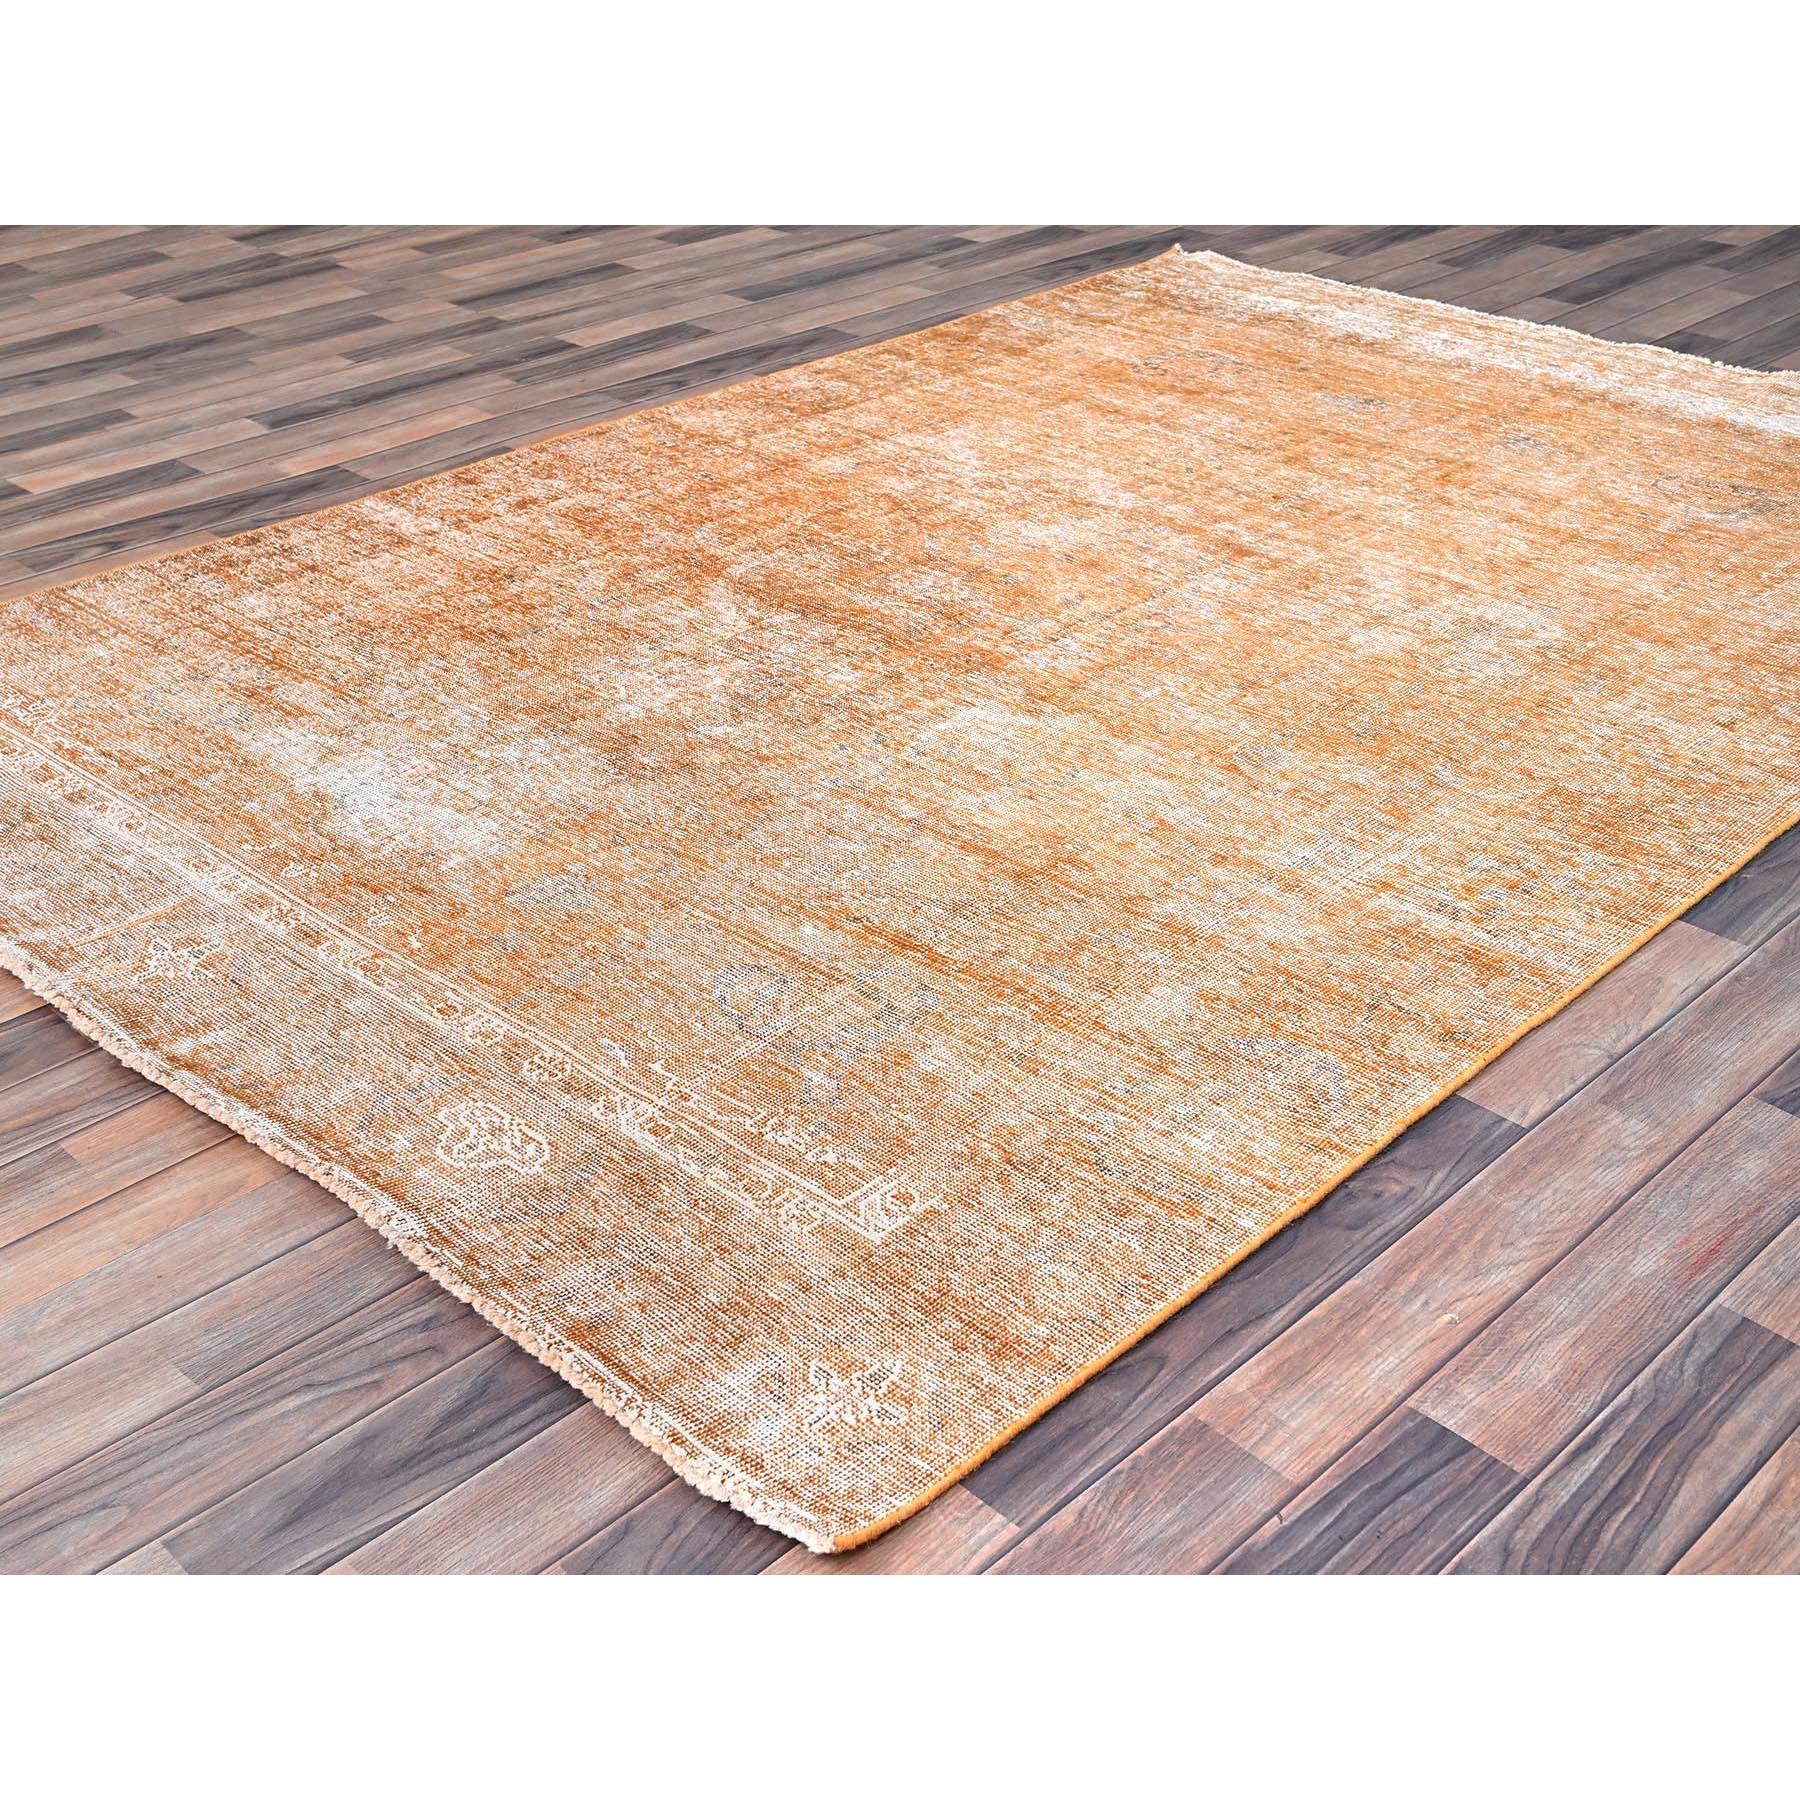 Orange Overdyed Old Persian Tabriz Distressed Evenly Worn Hand Knotted Wool Rug In Good Condition For Sale In Carlstadt, NJ